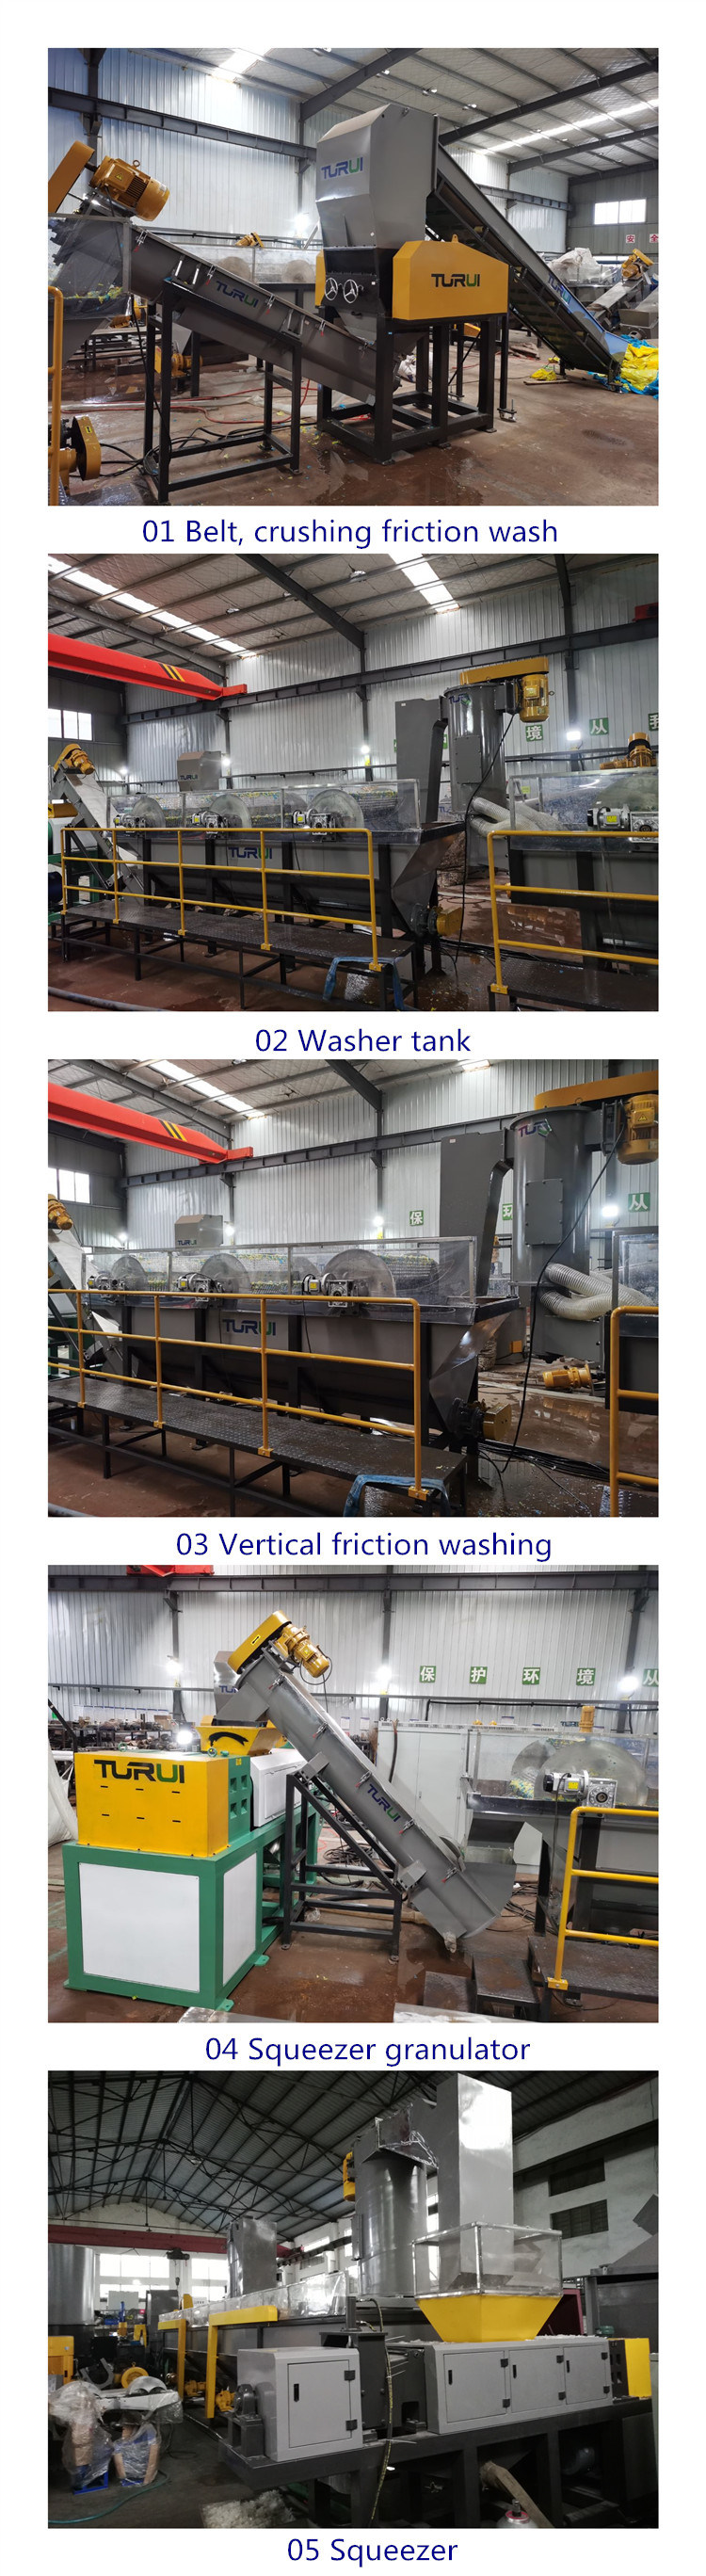 Recycling Washing Machine Used to Crush, Wash, Dewater and Dry PP, PE Film